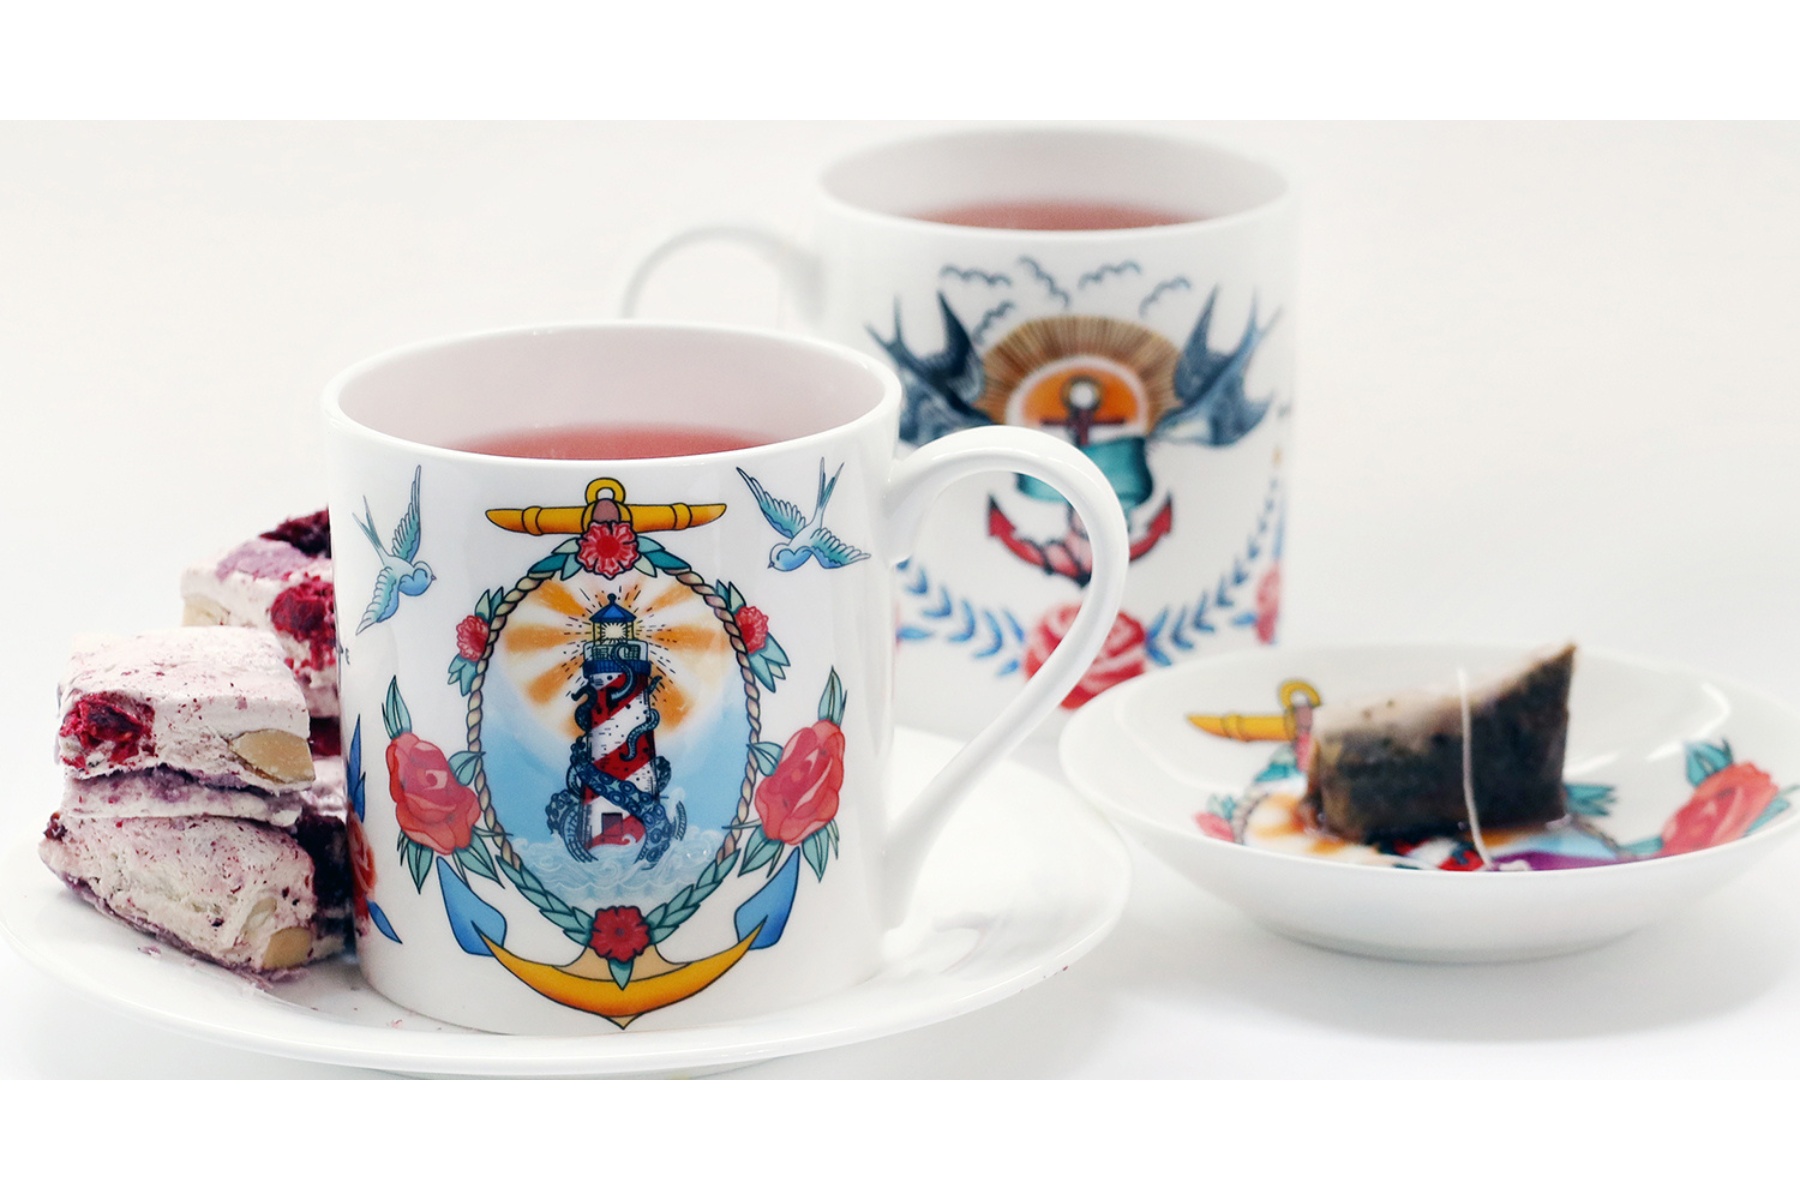 Mugs from The Sailor's Story with herbal tea